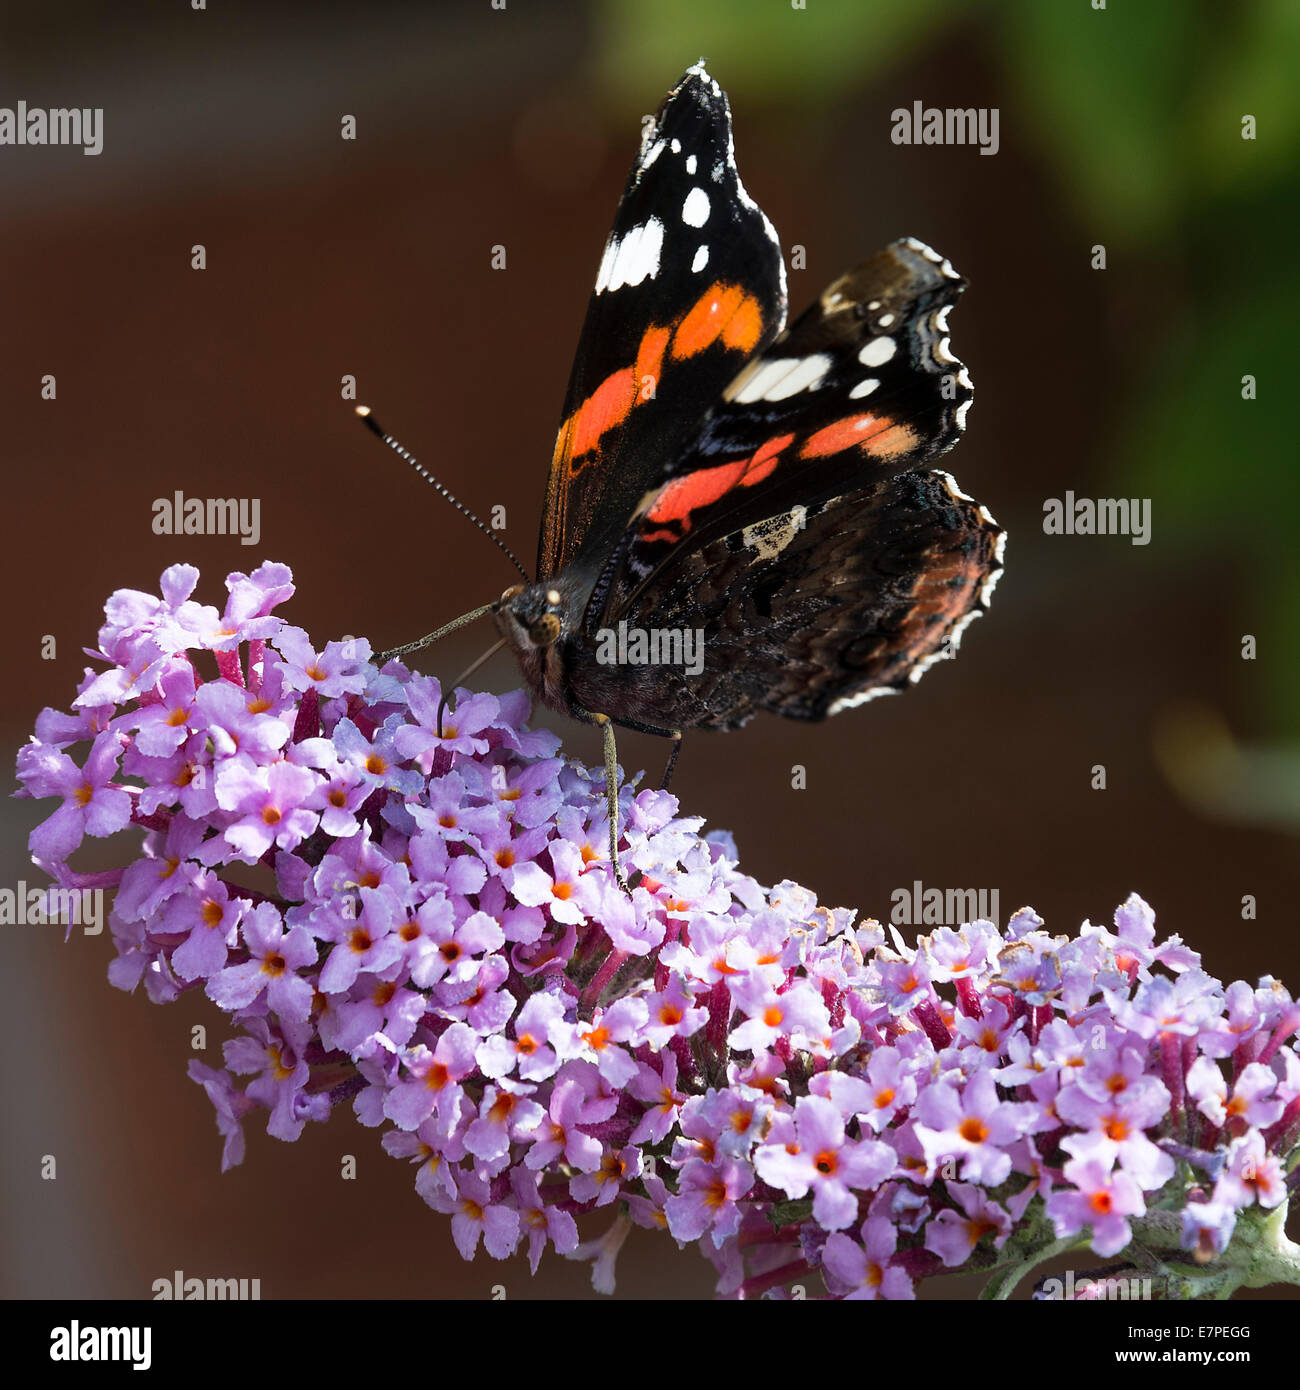 A Red Admiral Butterfly Feeding on a Purple Buddleja Flower in a Cheshire Garden England United Kingdom UK Stock Photo